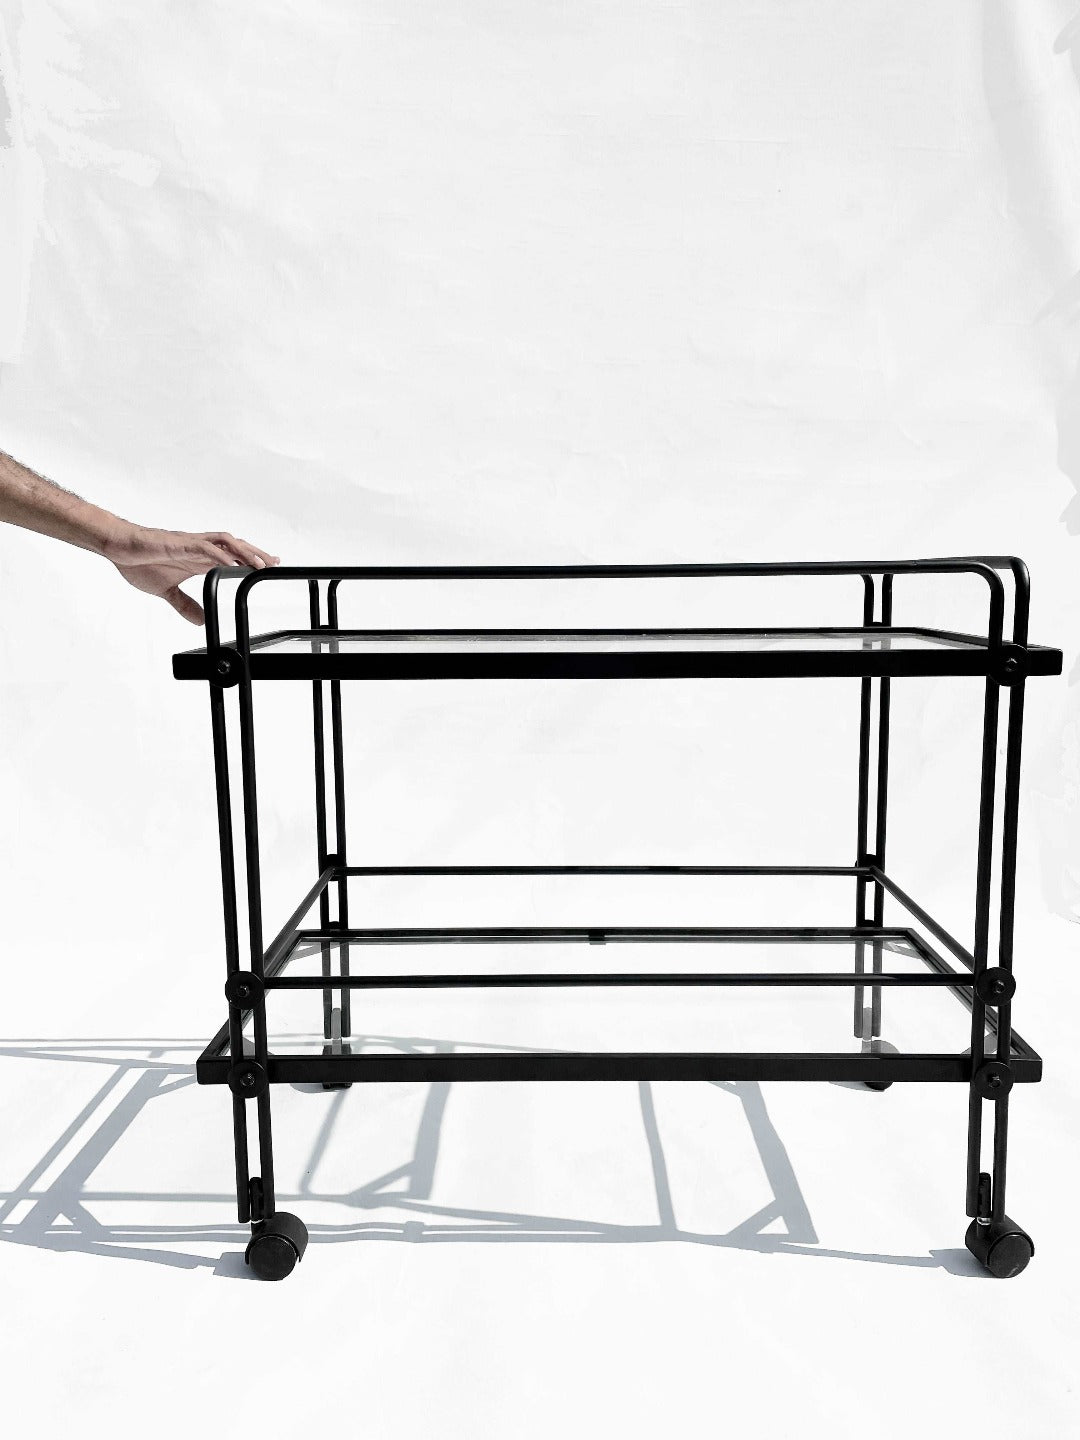 A sleek steel and tempered glass trolley, offering ample space for elegant entertaining